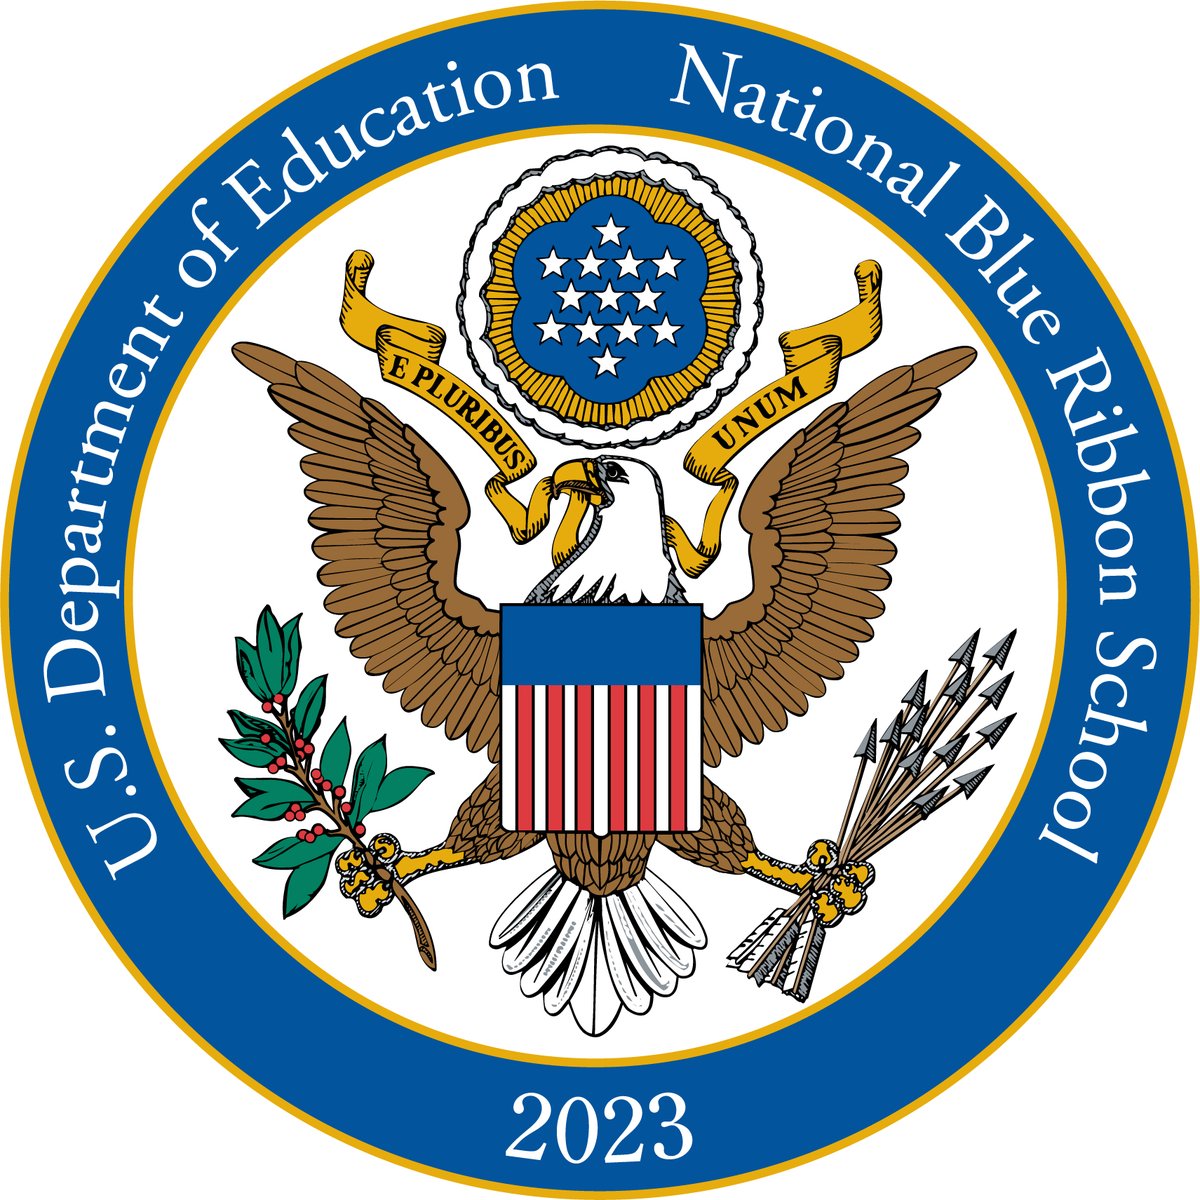 U.S. Secretary of Education Miguel Cardona announced today that Bishop Chatard High School has been named a 2023 National Blue Ribbon School. Bishop Chatard is one of 10 schools in the state of Indiana, and one of only 2 in Indianapolis, to receive this national honor.